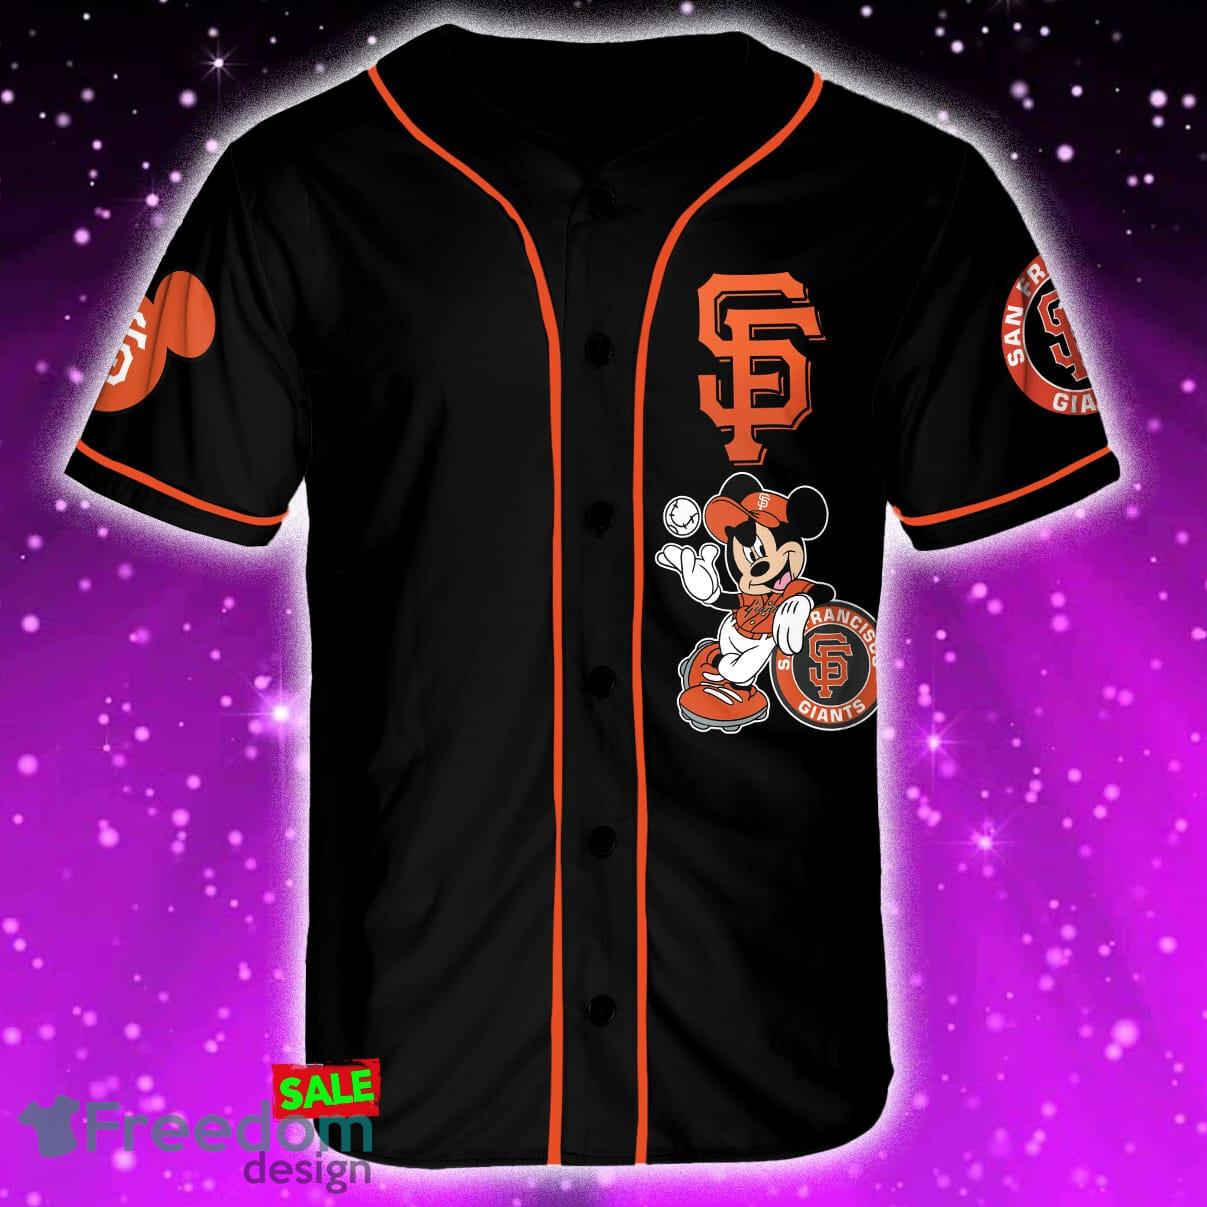 SALE] Personalized MLB San Francisco Giants Home Jersey Style